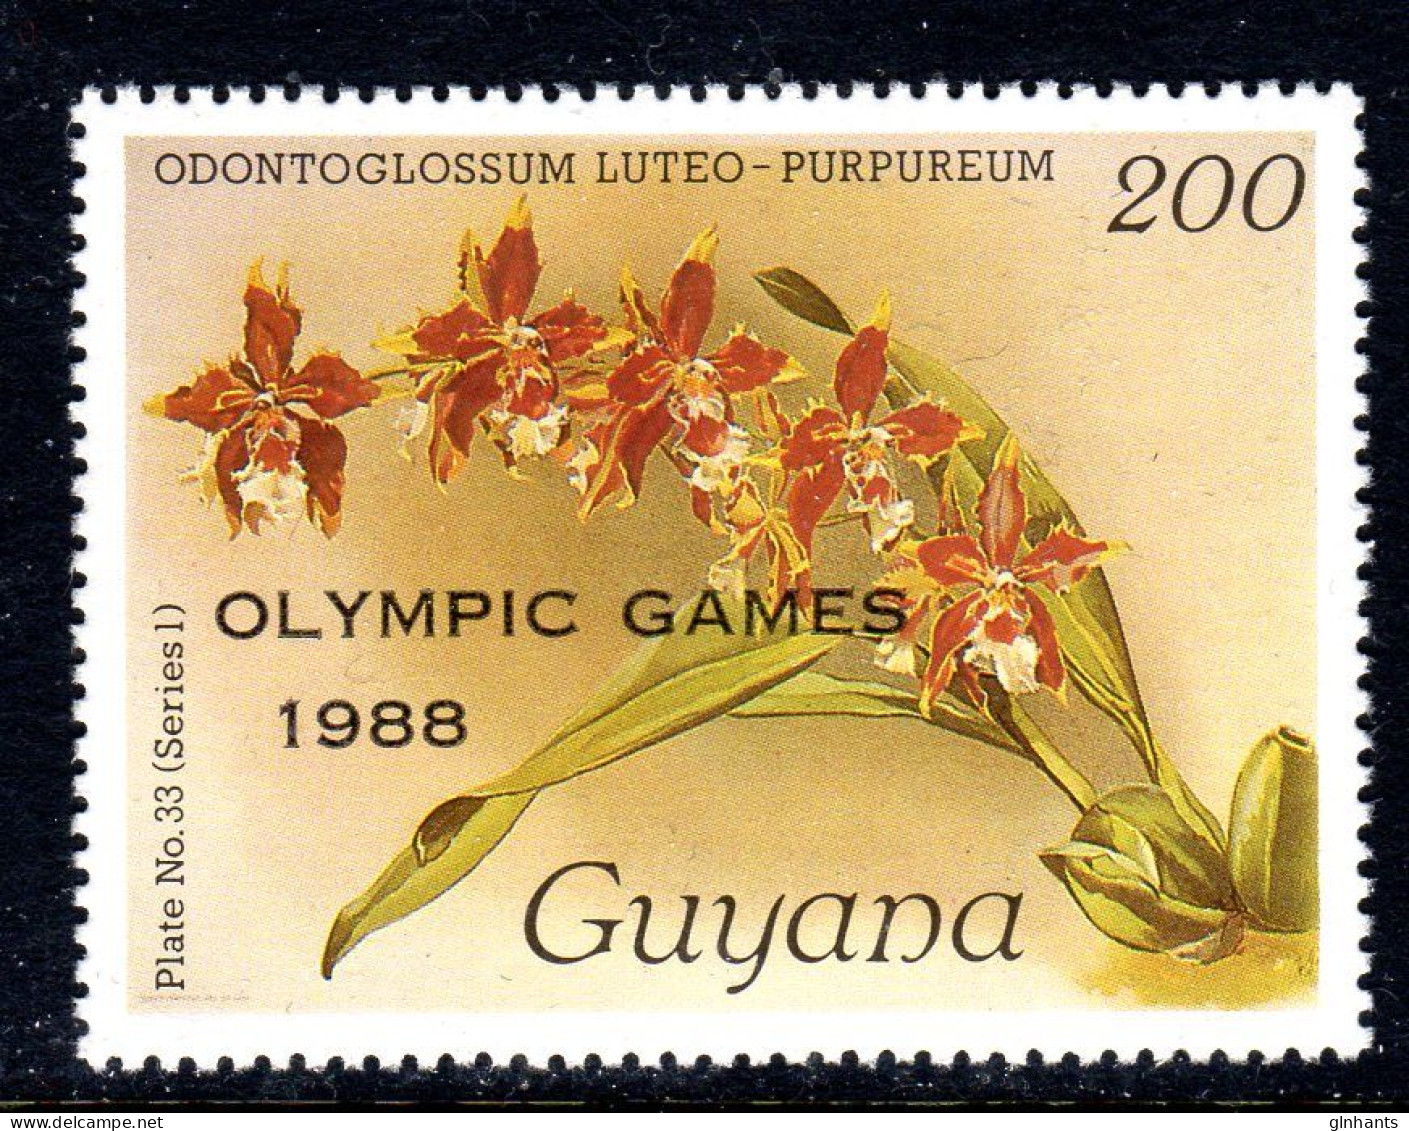 GUYANA - 1989 REICHENBACHIA ORCHIDS OVERPRINTED OLYMPIC GAMES PLATE 33 SERIES 1 FINE MNH ** SG 2479 - Guyana (1966-...)